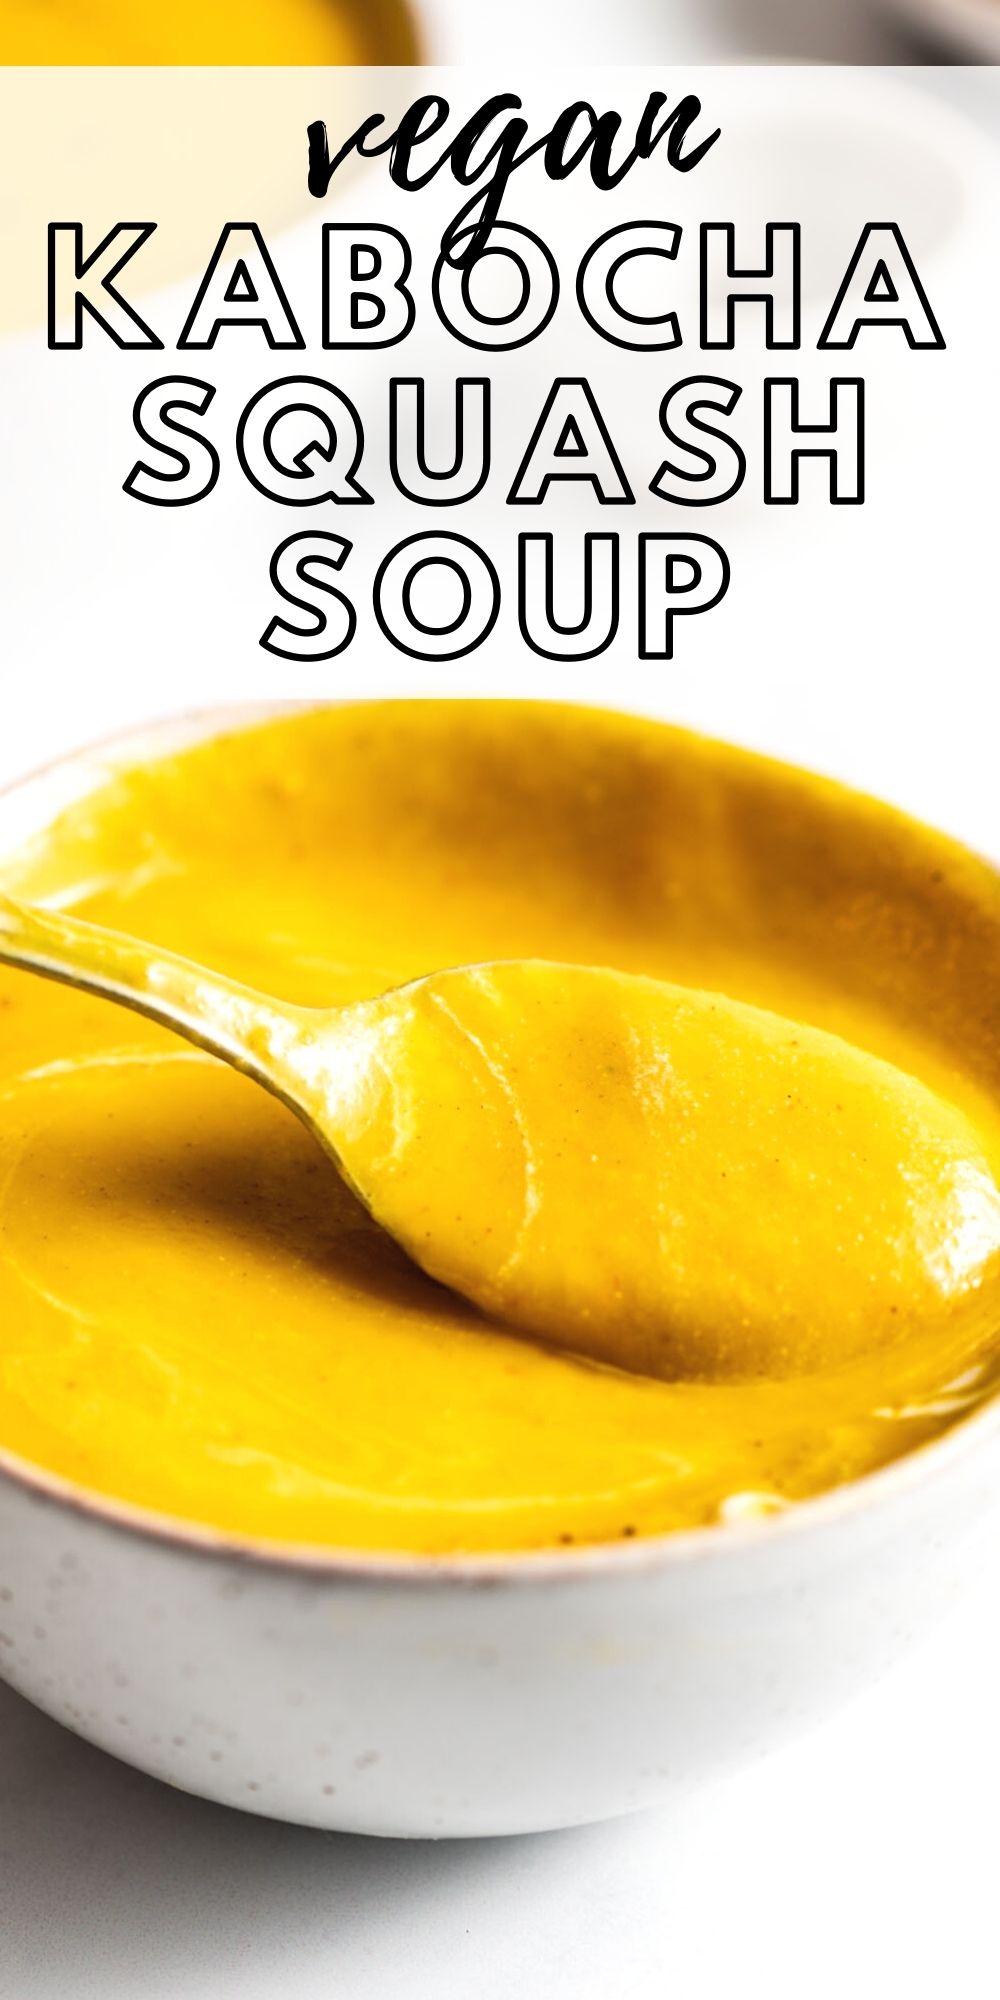 Pinterest graphic with an image and text for squash soup.